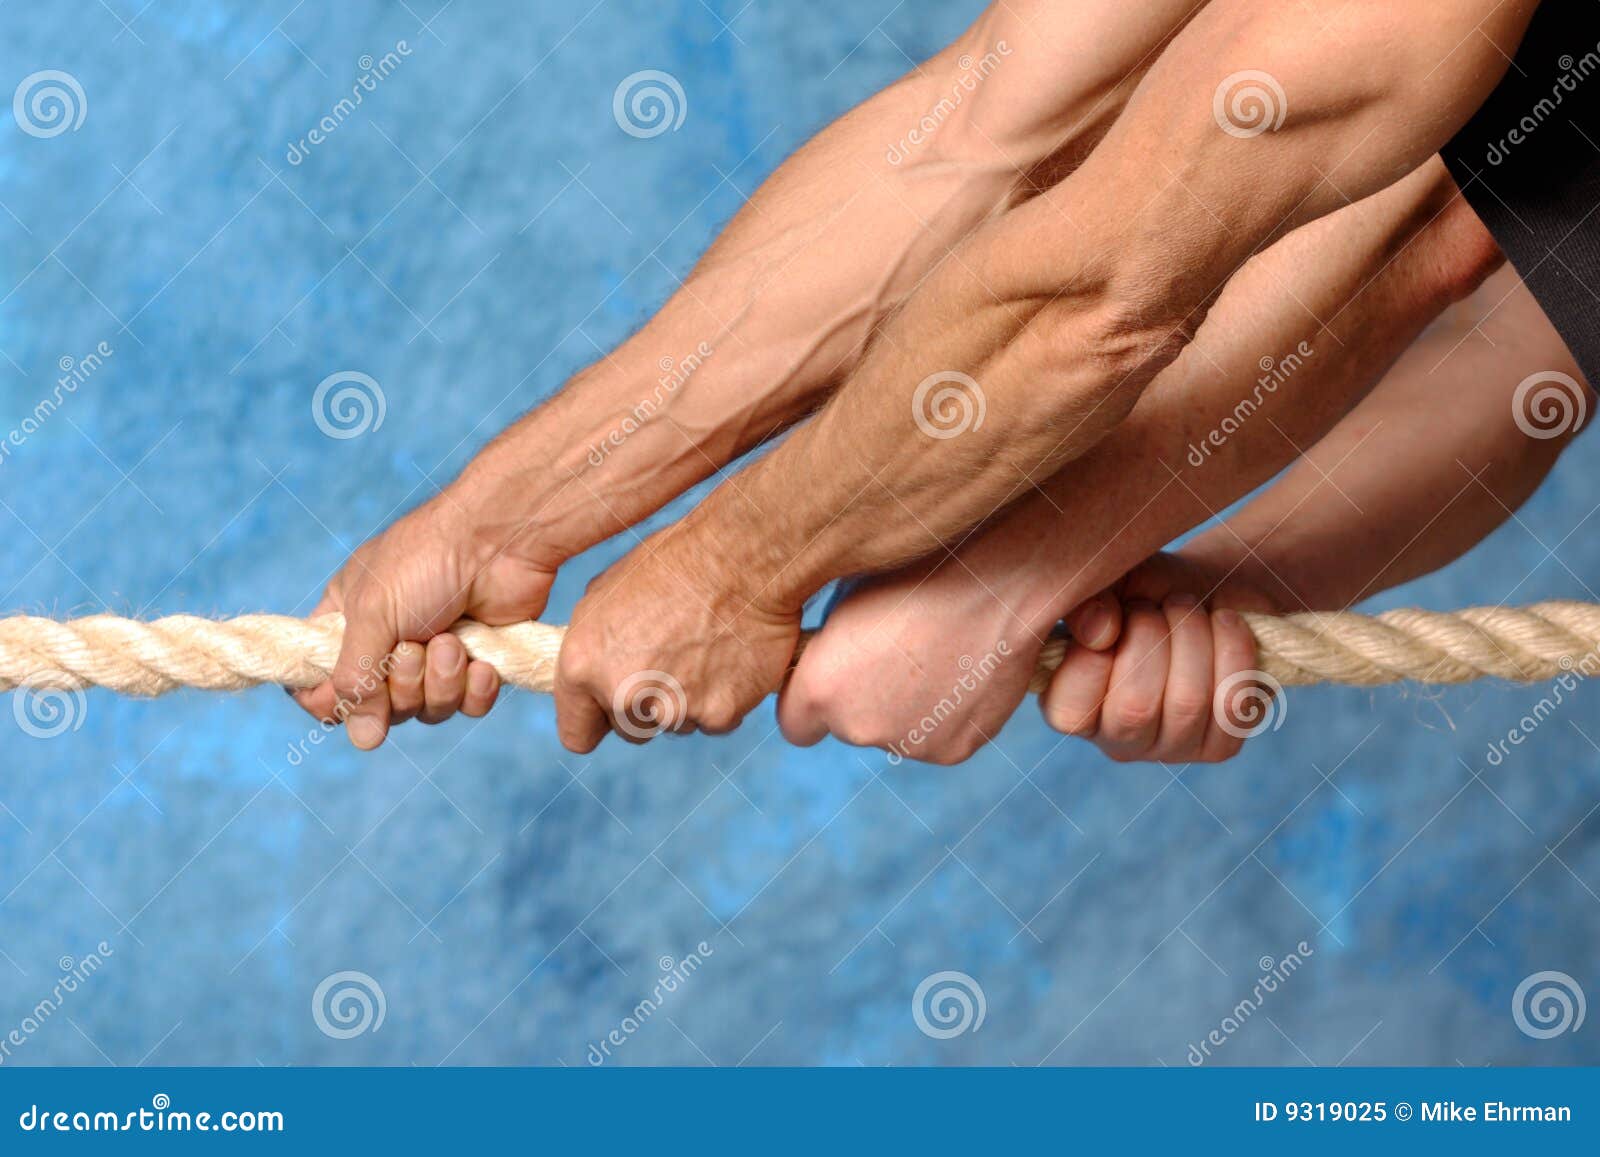 Hands pulling rope stock image. Image of people, activity - 9319025